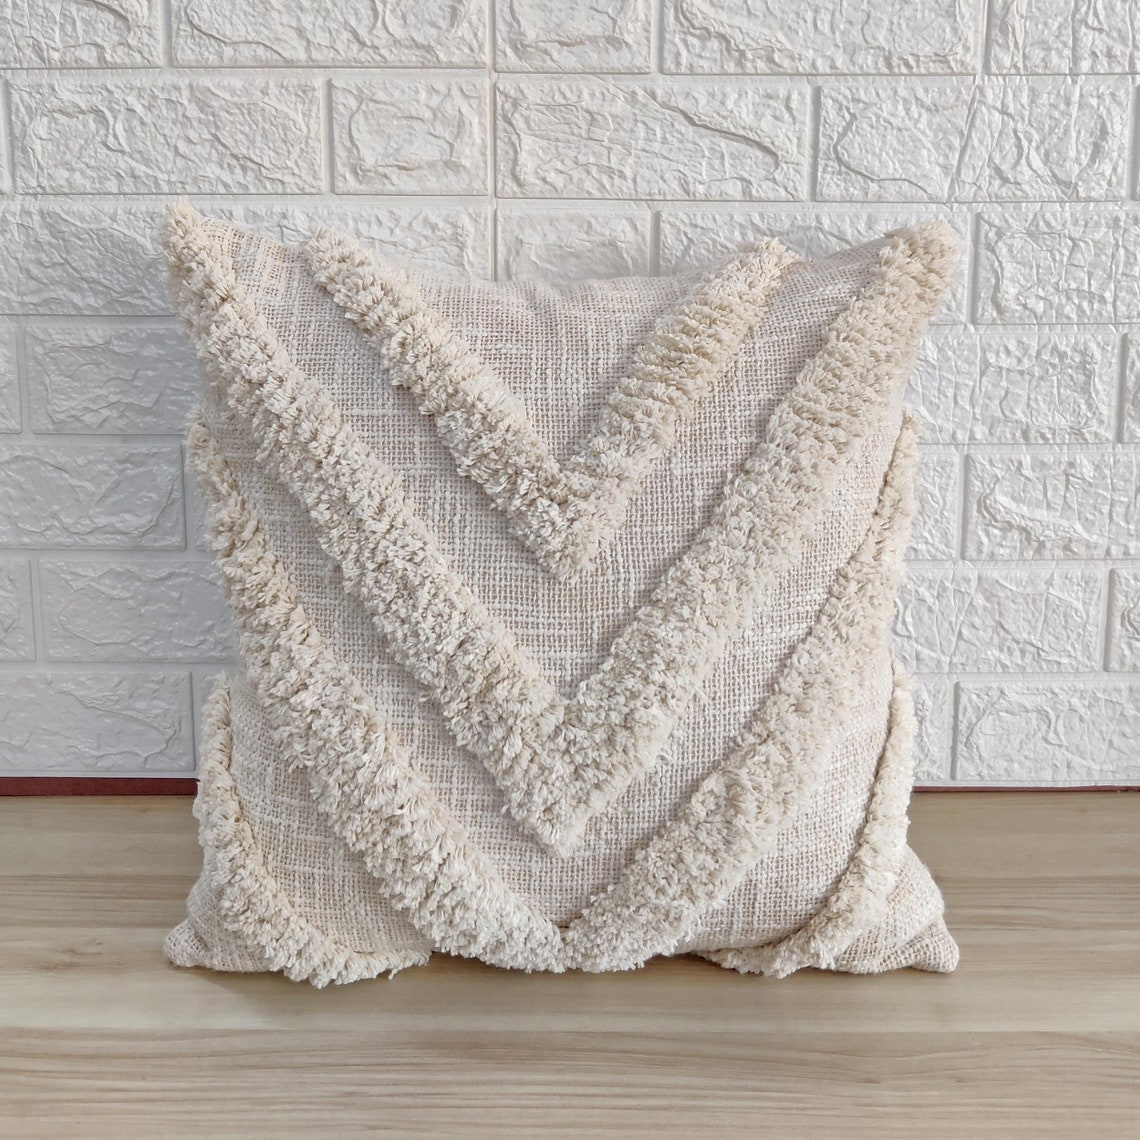 Ivory Hand tufted Textured Cotton cushion cover